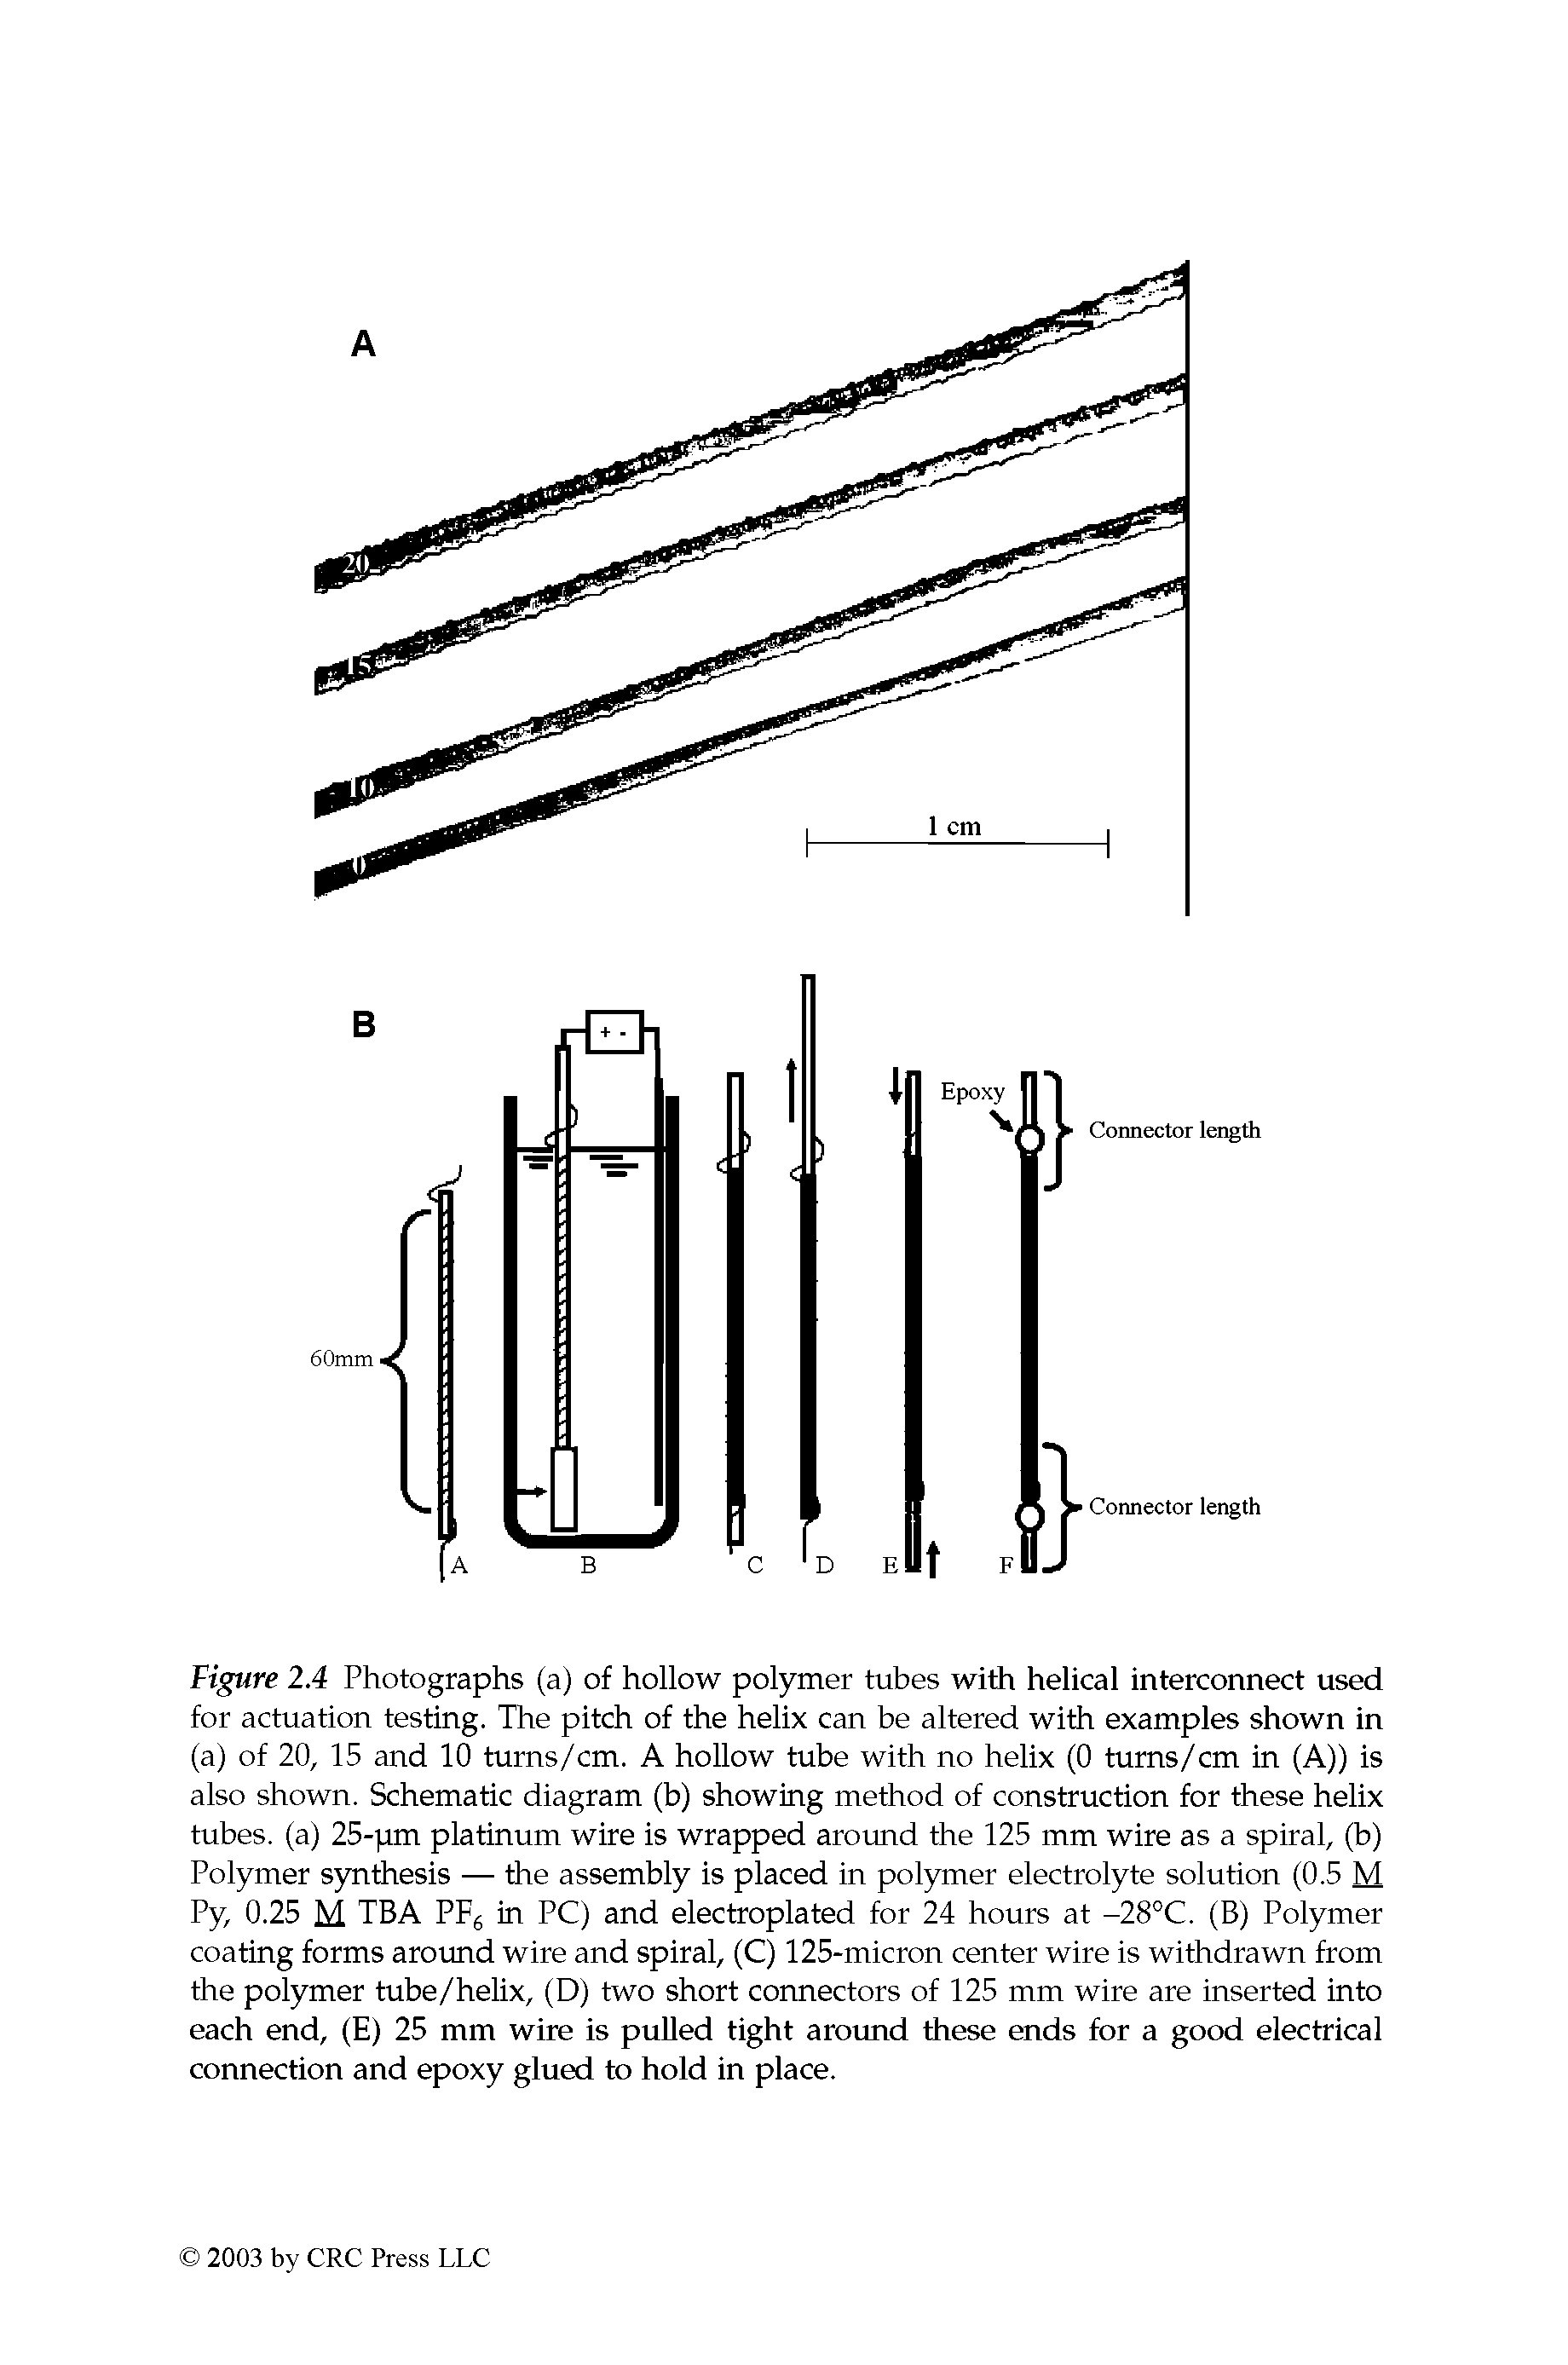 Figure 2.4 Photographs (a) of hollow pol5mier tubes with helical interconnect used for actuation testing. The pitch of the helix can be altered with examples shown in (a) of 20, 15 and 10 turns/cm. A hoUow tube with no helix (0 tums/cm in (A)) is also shown. Schematic diagram (b) showing method of construction for these helix tubes, (a) 25-pm platinum wire is wrapped around the 125 mm wire as a spiral, (b) Polymer synthesis — the assembly is placed in polymer electrolyte solution (0.5 M Py, 0.25 M TEA PF in PC) and electroplated for 24 hours at -28°C. (B) Polymer coating forms around wire and spiral, (C) 125-micron center wire is withdrawn from the polymer tube/helix, (D) two short connectors of 125 mm wire are inserted into each end, (E) 25 mm wire is pulled tight around these ends for a good electrical connection and epoxy glued to hold in place.